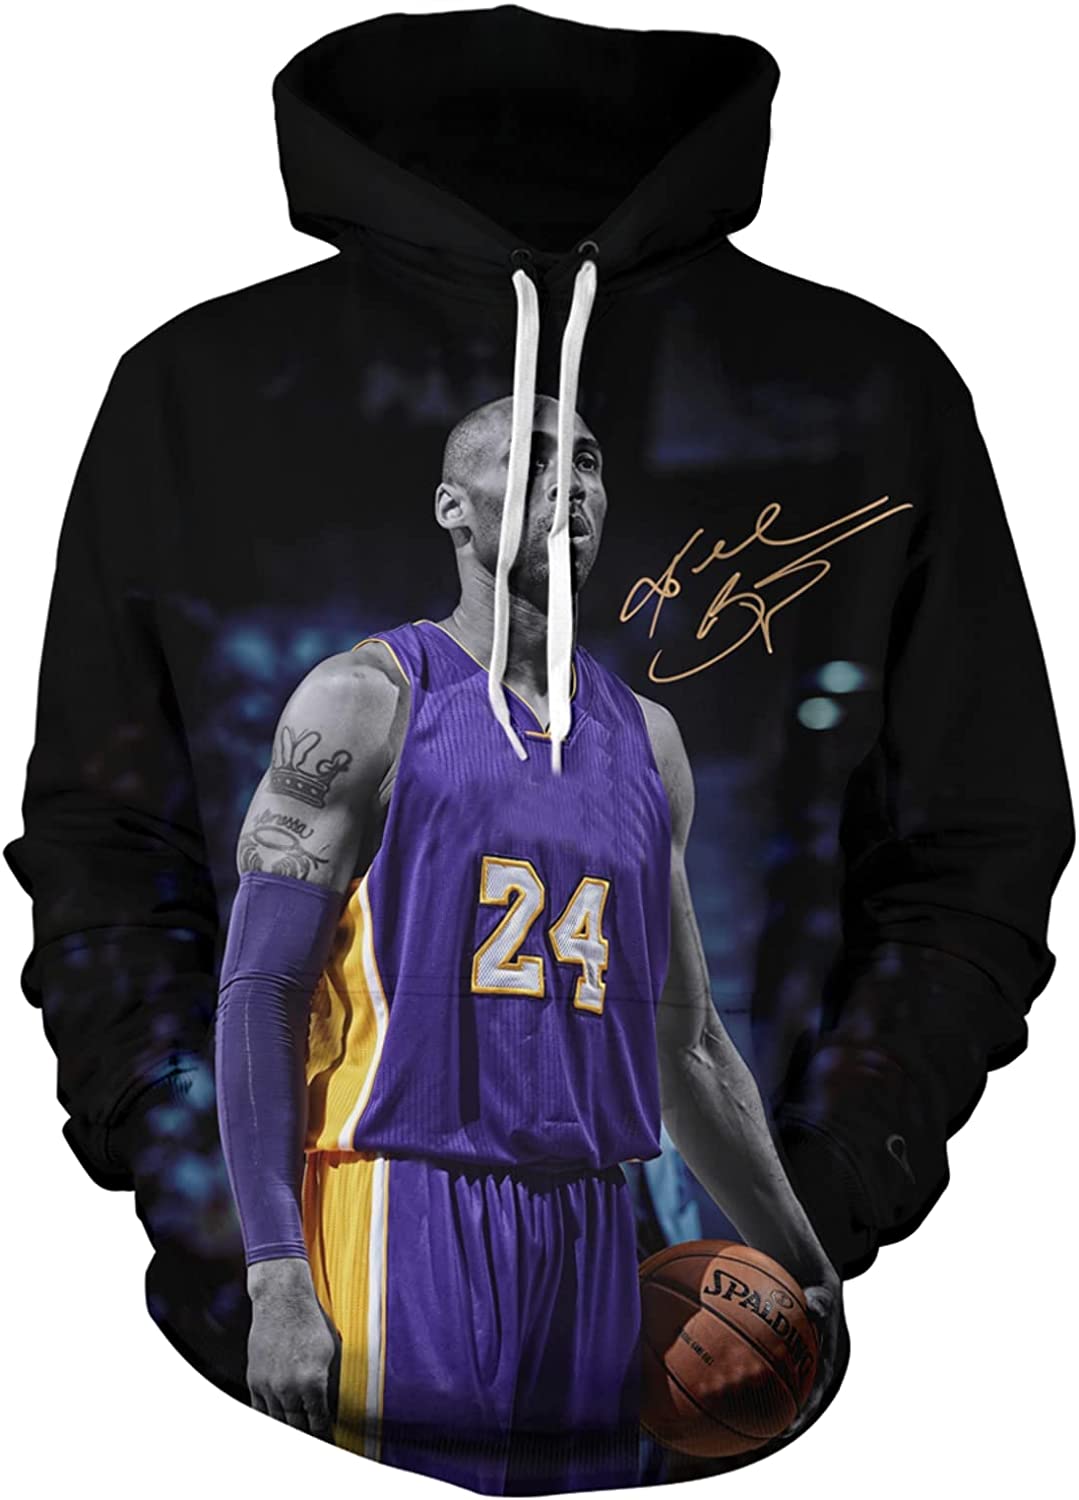 Gthprk R.I.P Basketball Superstar No. 24 And No. 8 Themed Men'S Hoodies, Sports Hoodies, Outdoor Sweater Hoodies